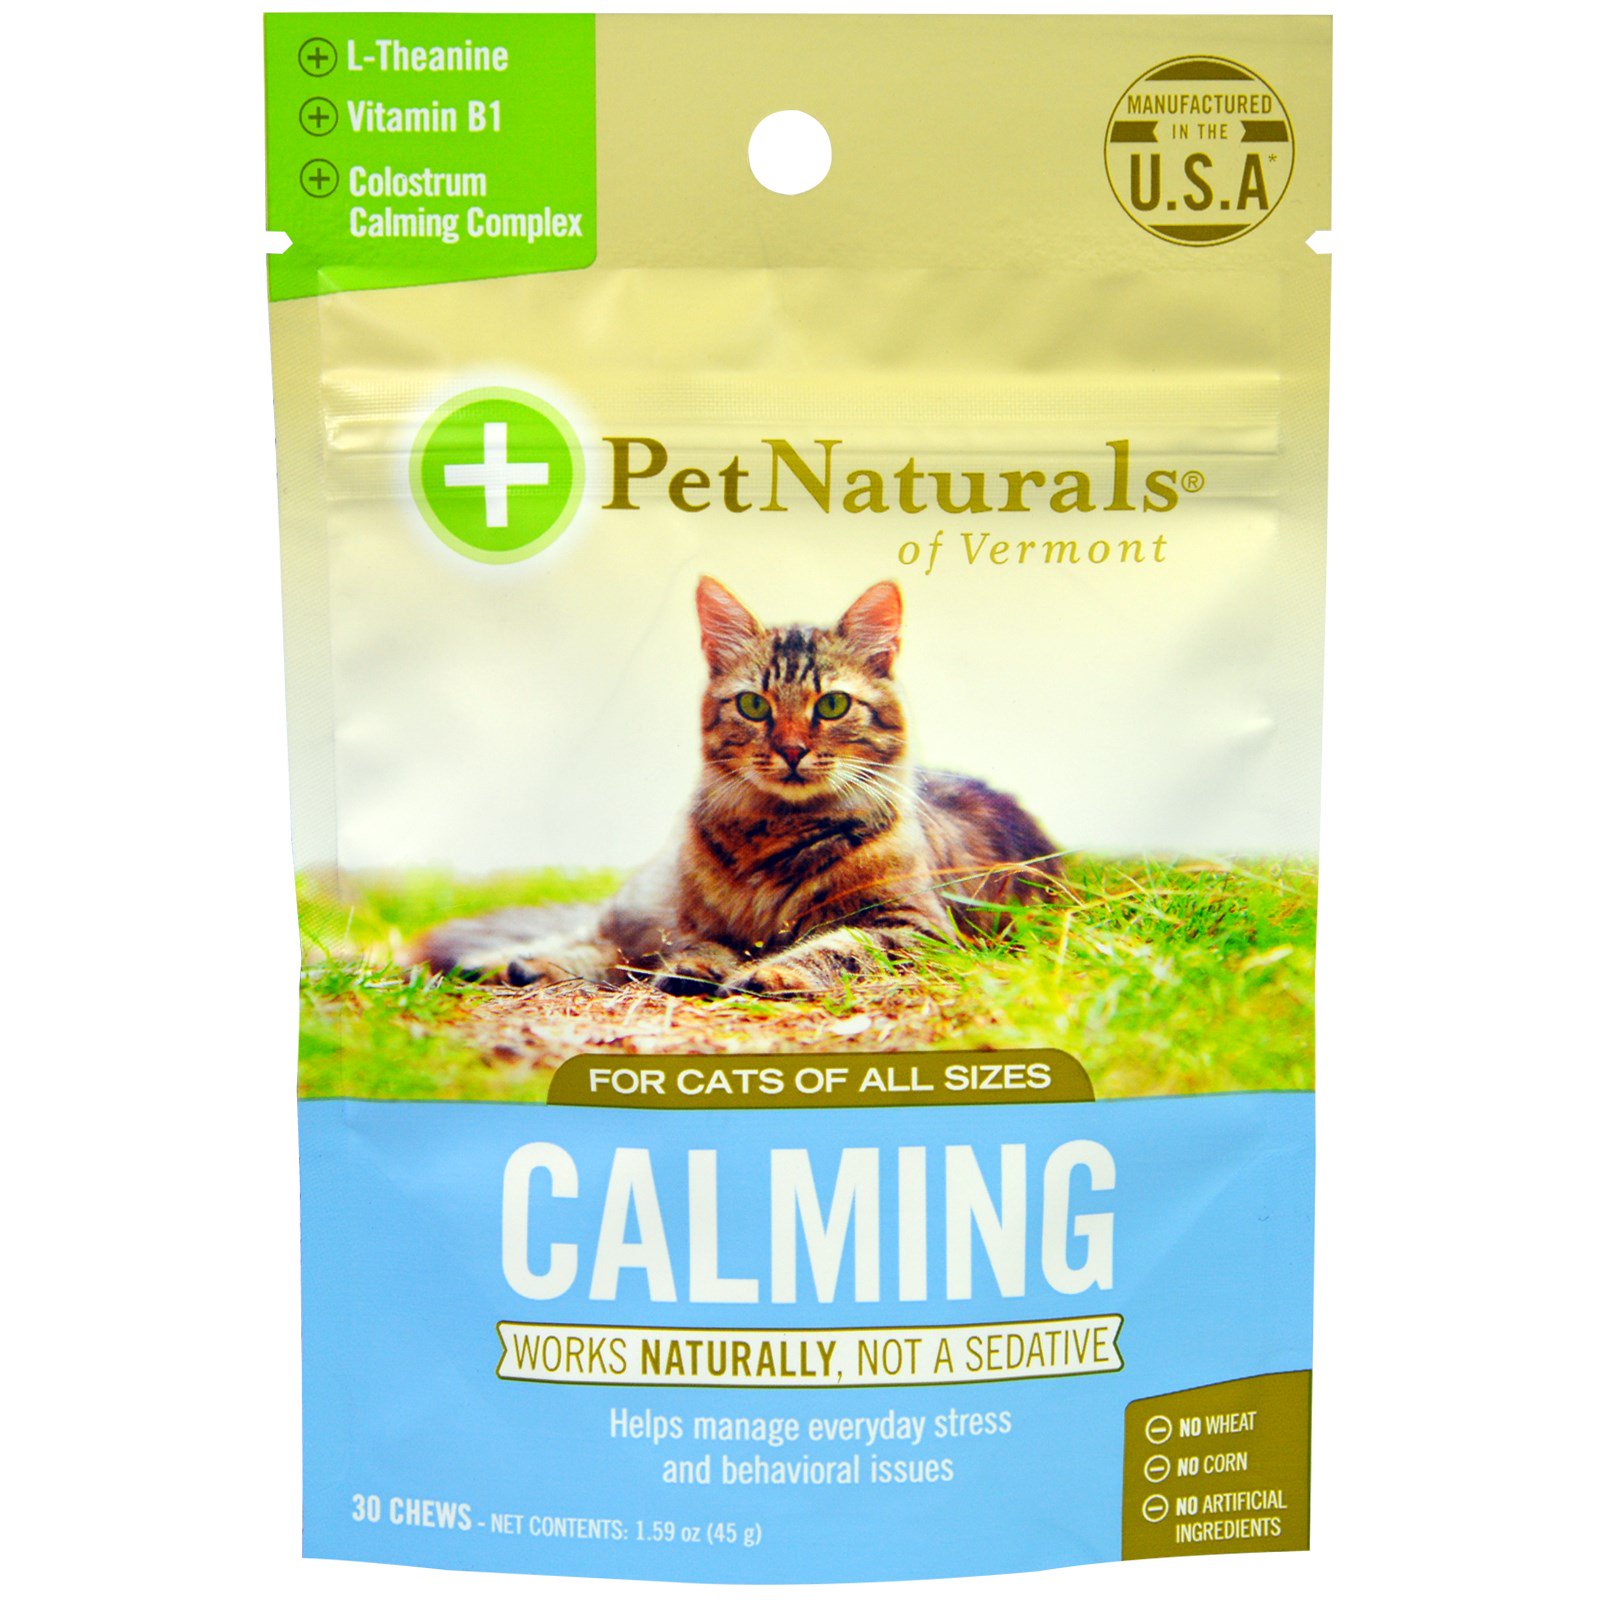 Pet Naturals of Vermont, Calming, For Cats, 30 Chews, 1.59 oz (45 g